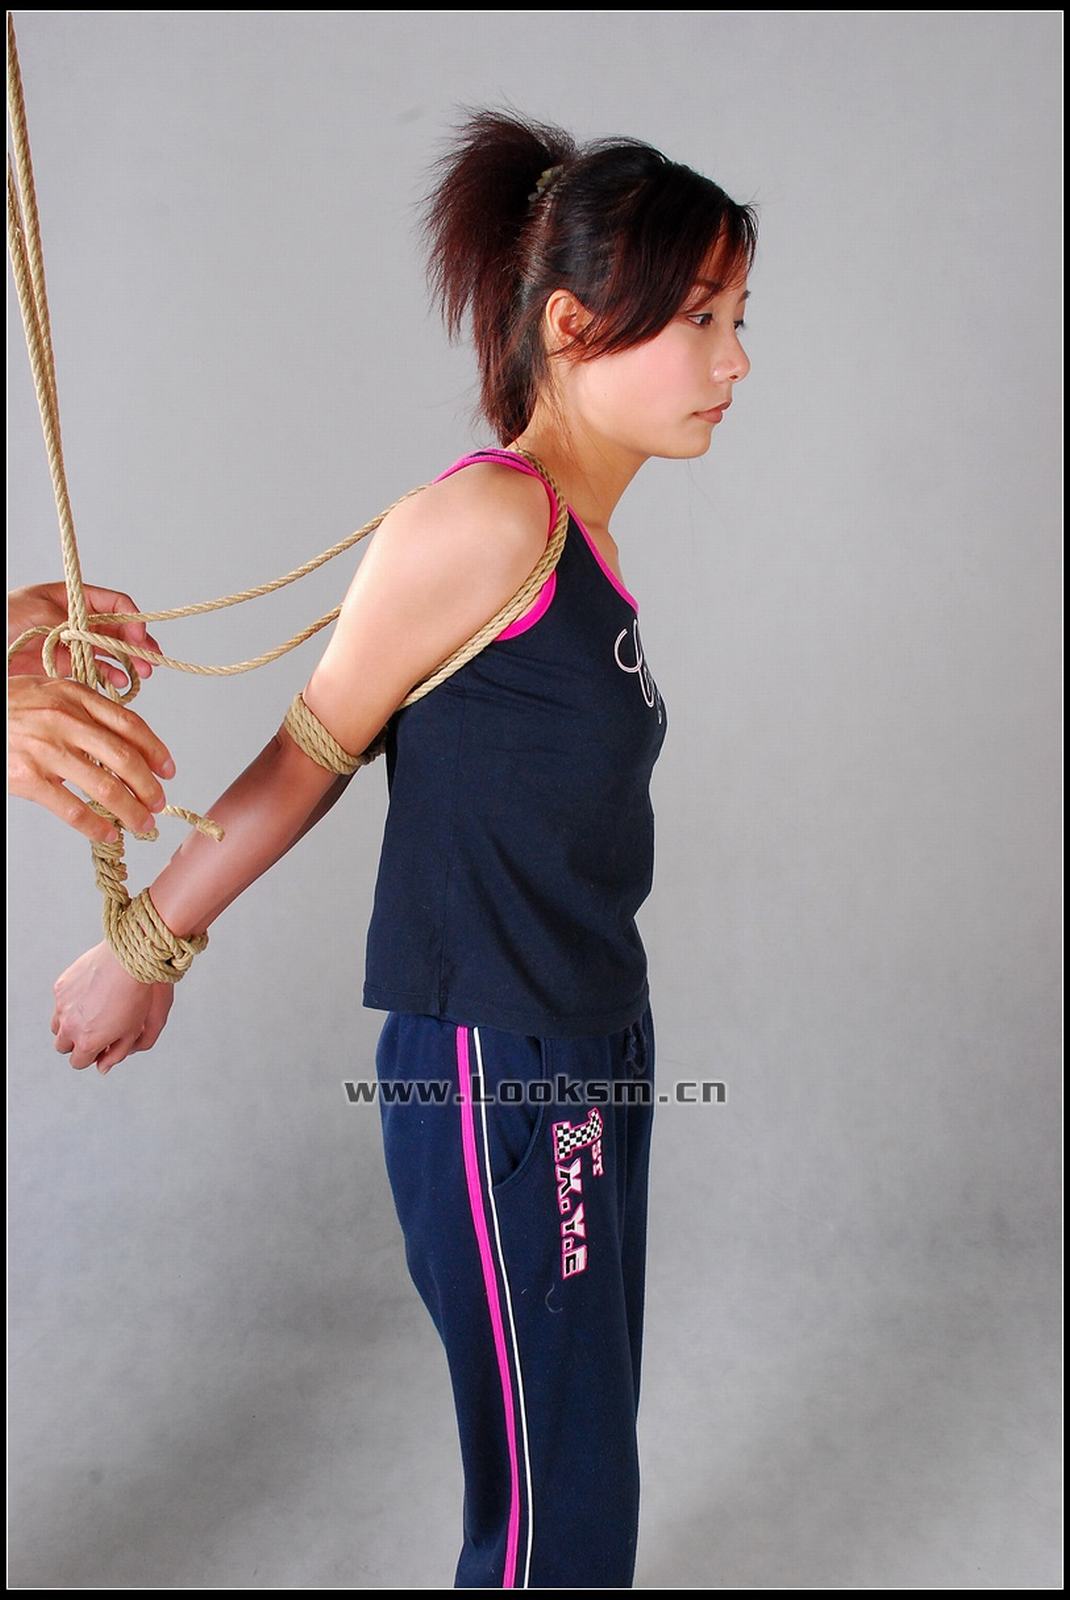 Chinese Rope Model 307